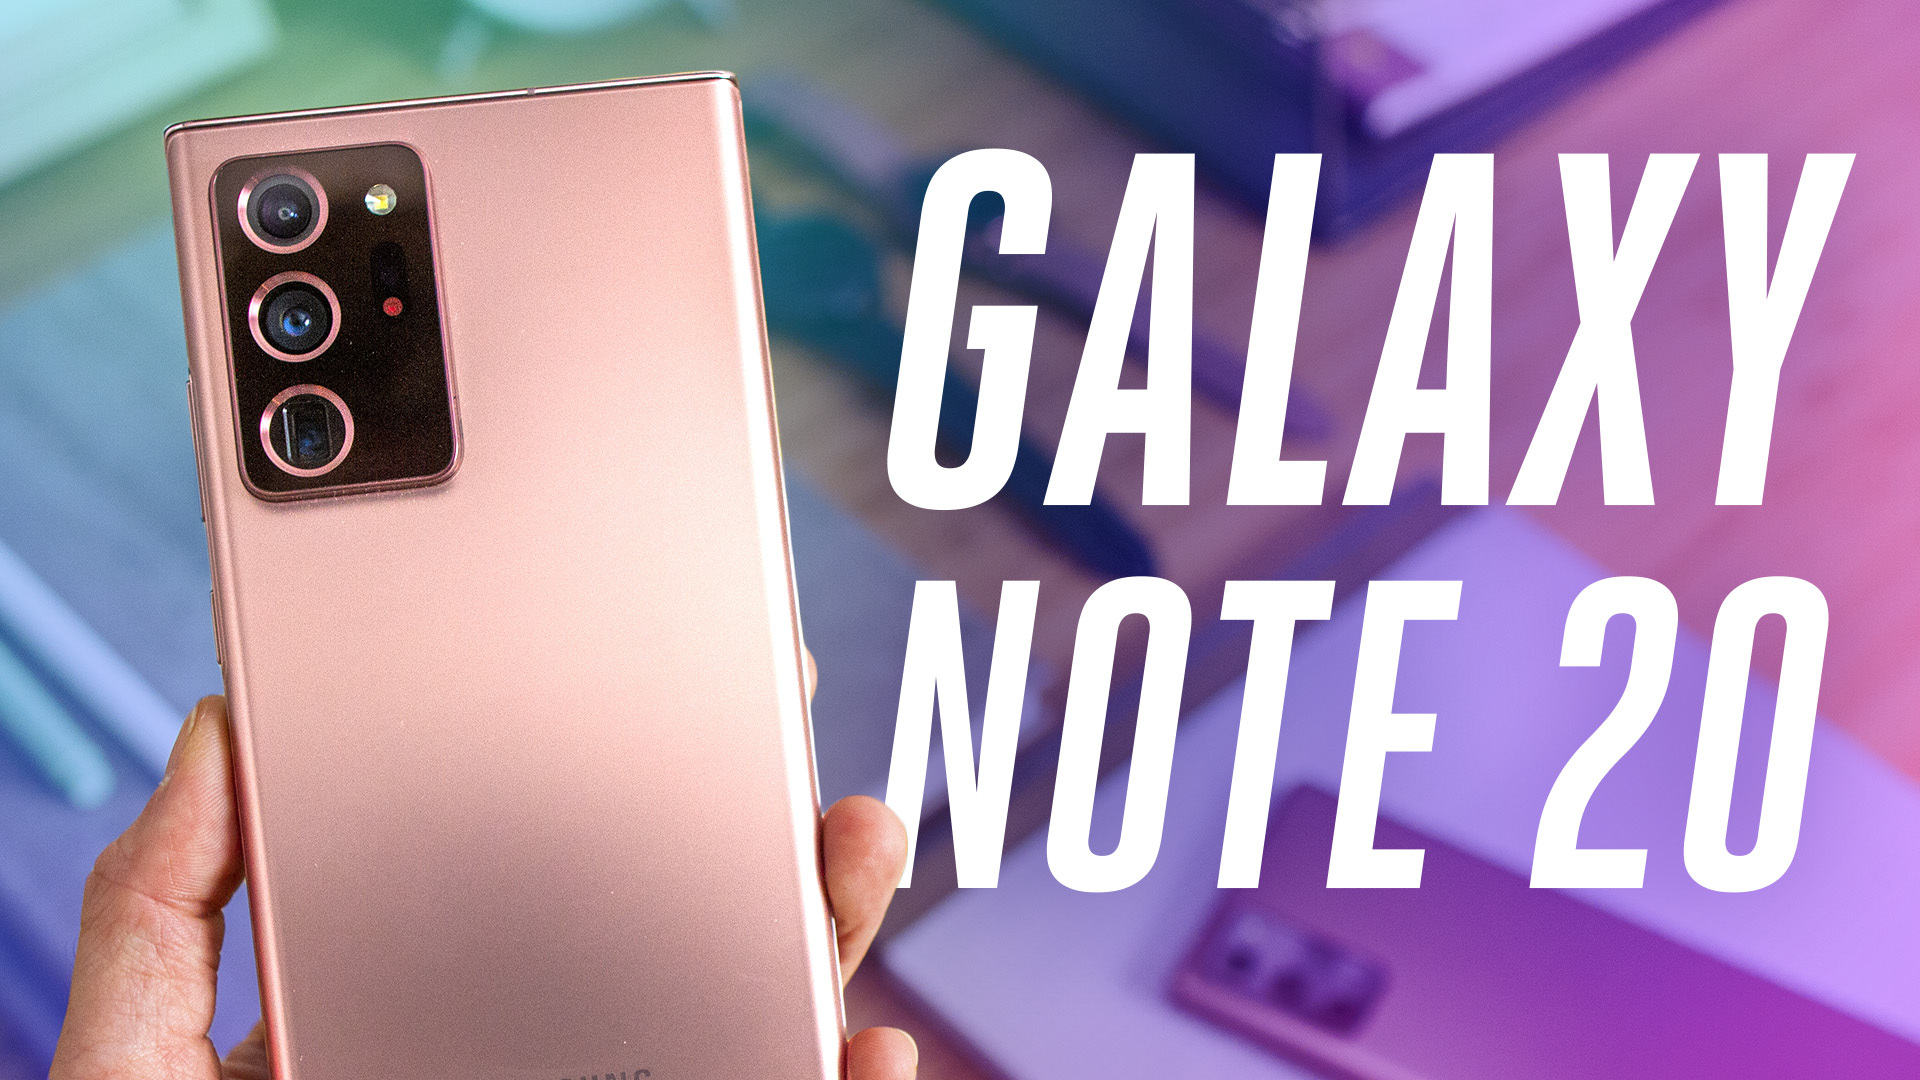 Samsung Galaxy Note 20 Ultra: The first three things I noticed about  Samsung's newest phone